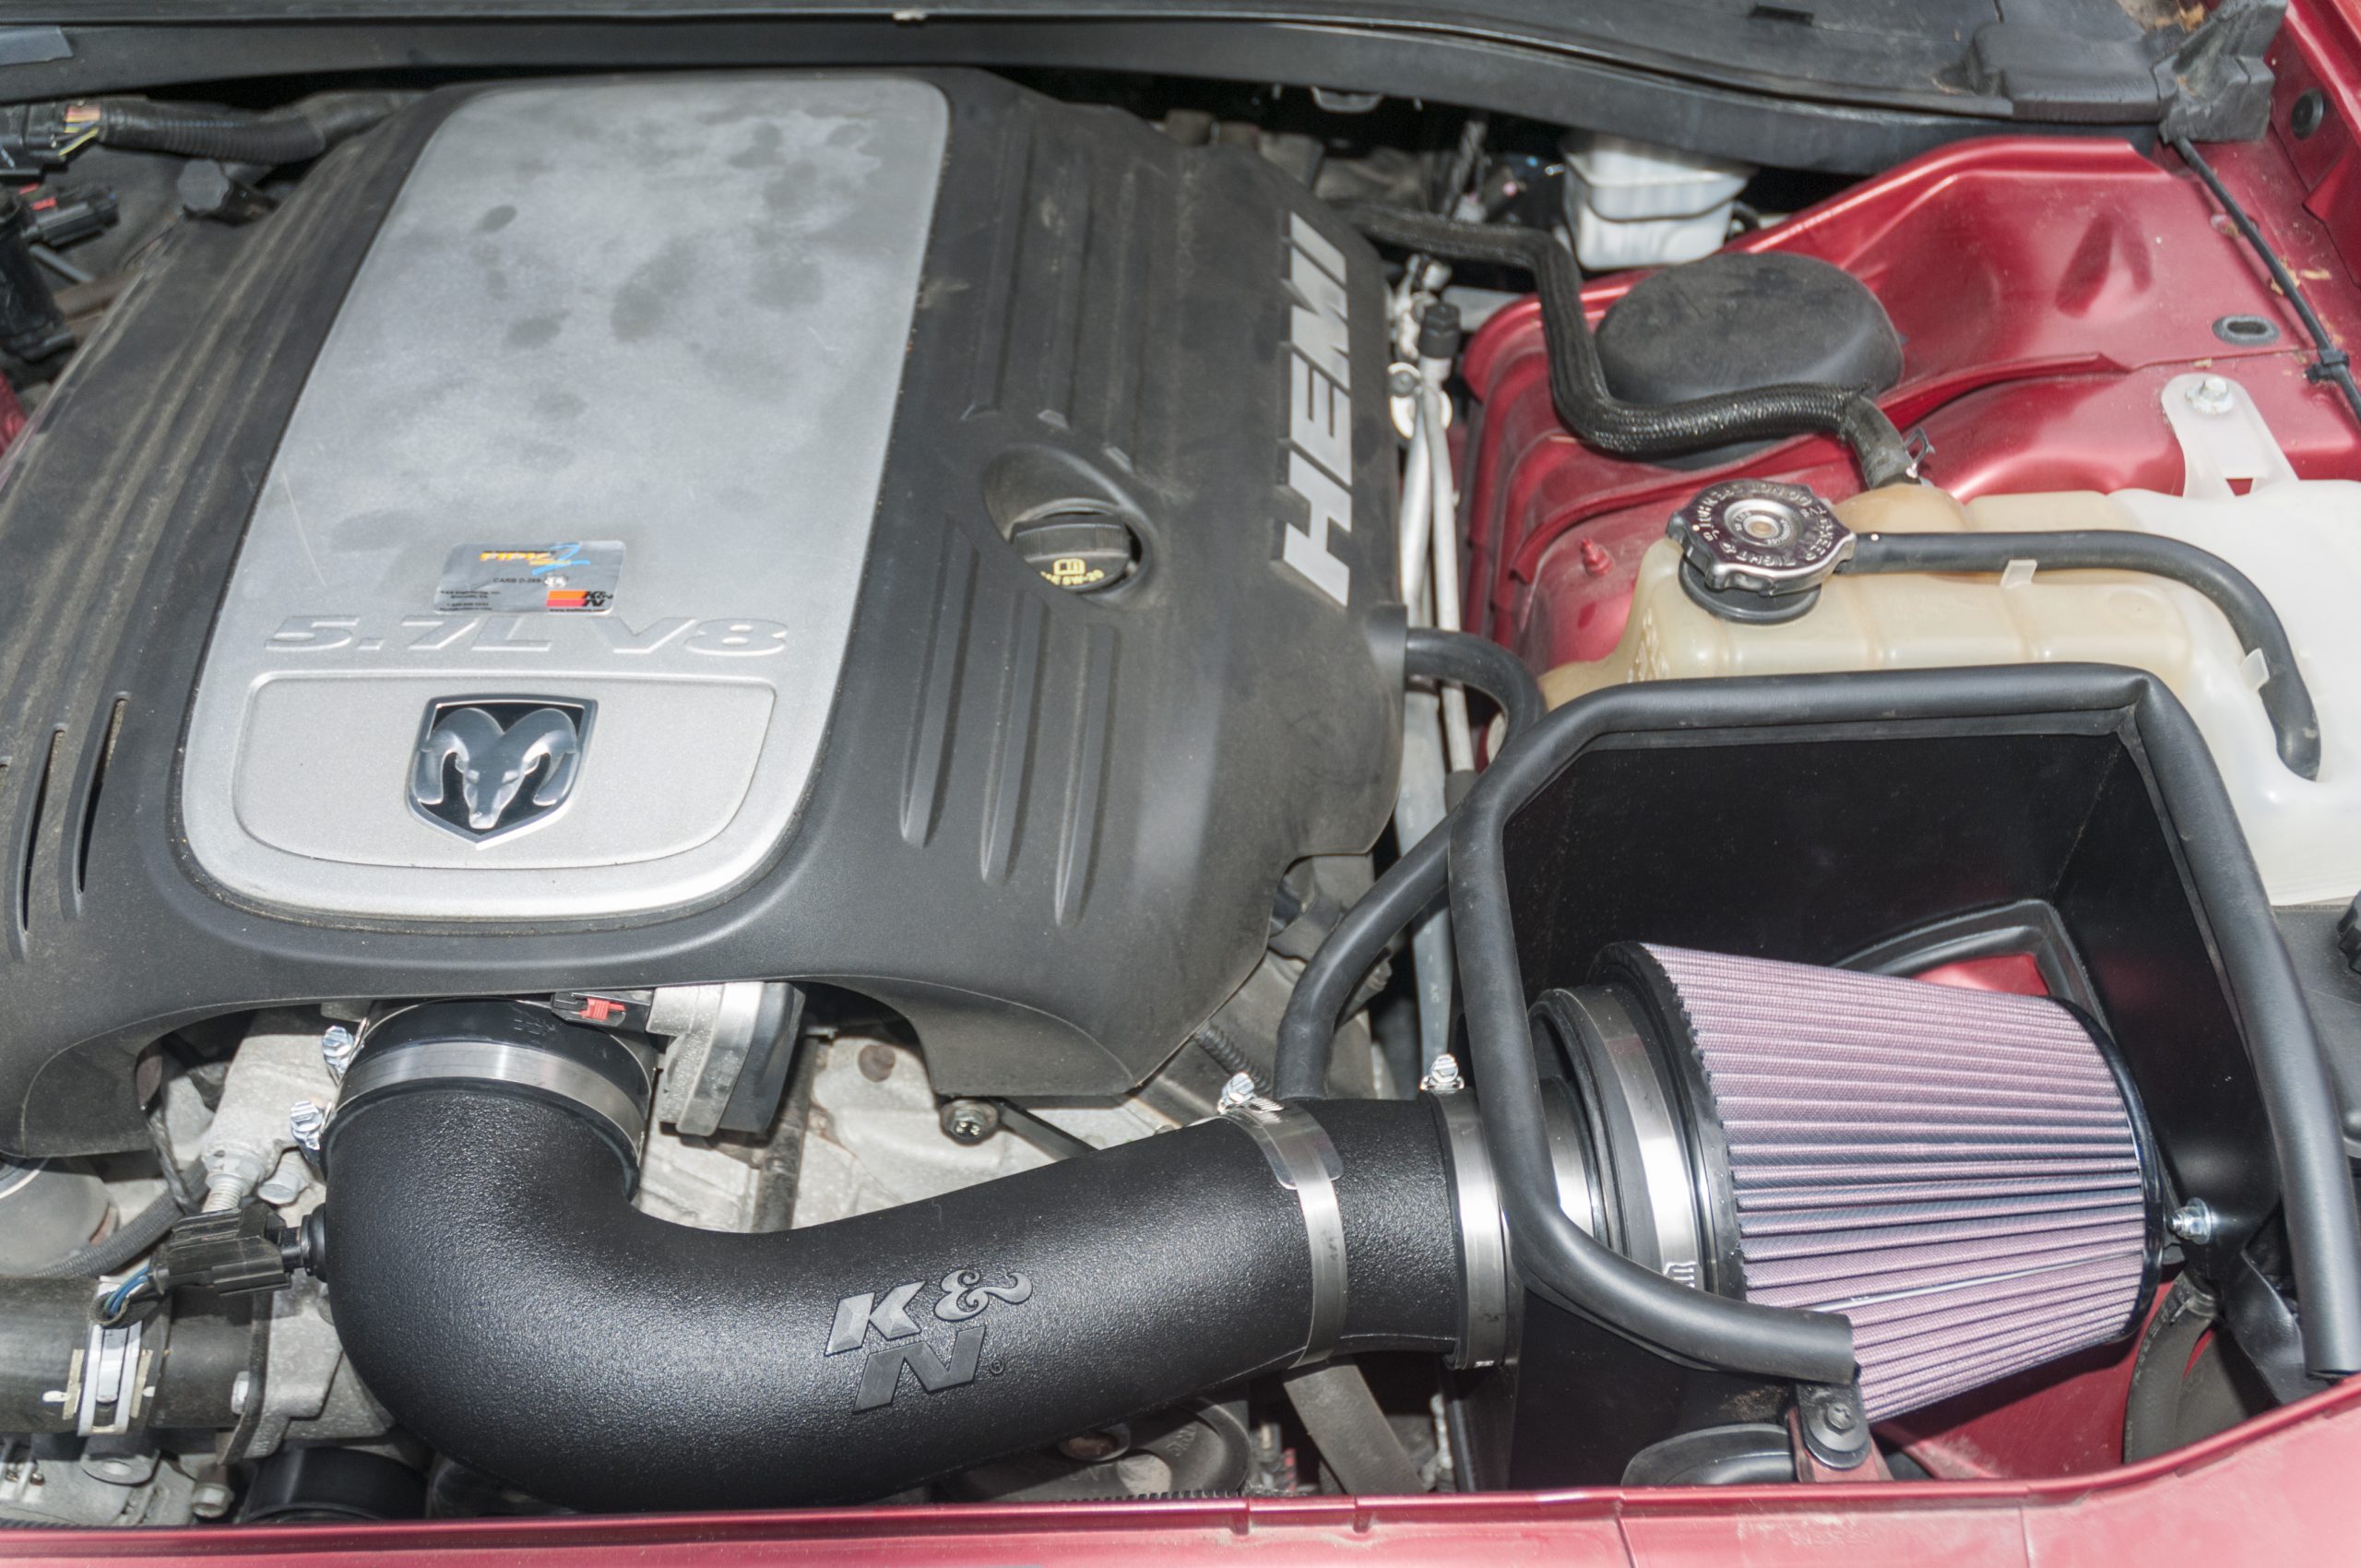 Cold air intake installed on a Dodge Charger Hemi V-8 engine